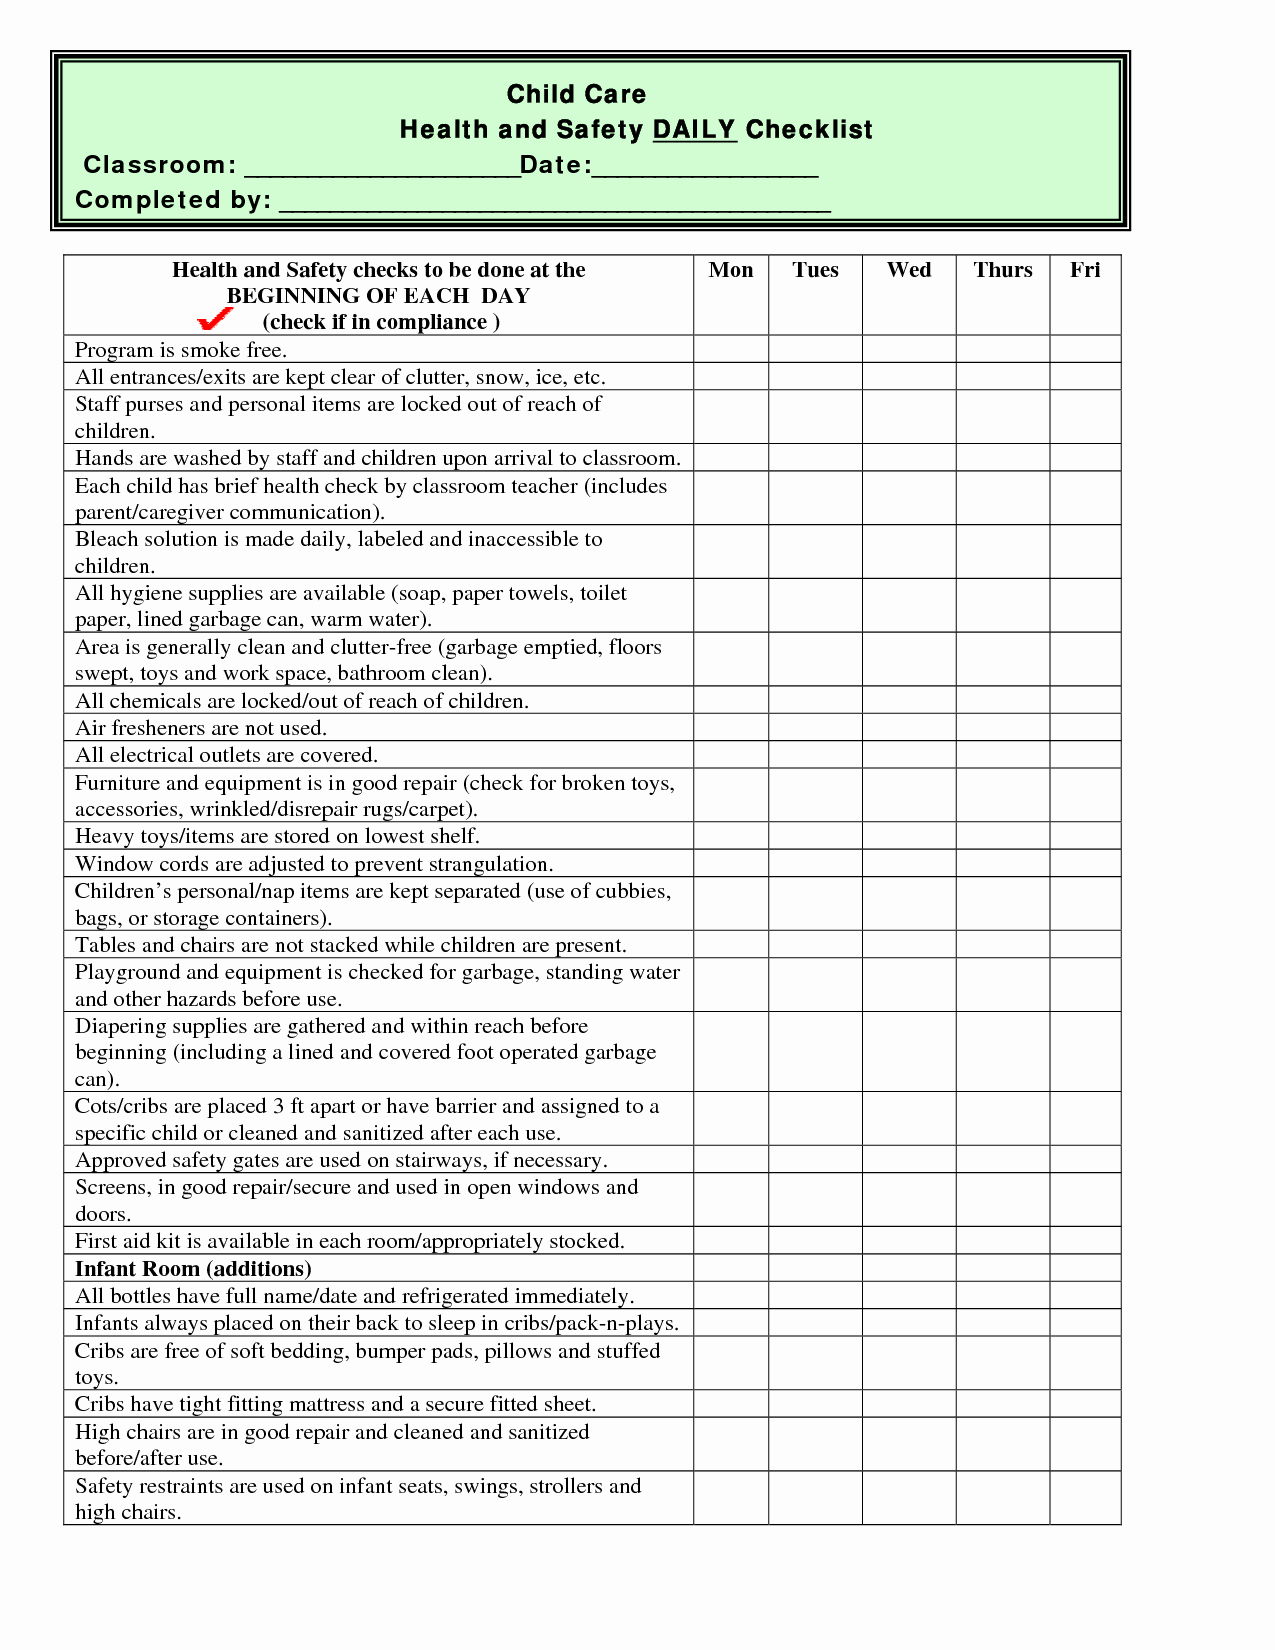 Safety Plan Template for Youth Best Of Child Care Health and Safety Daily Checklist Classroom